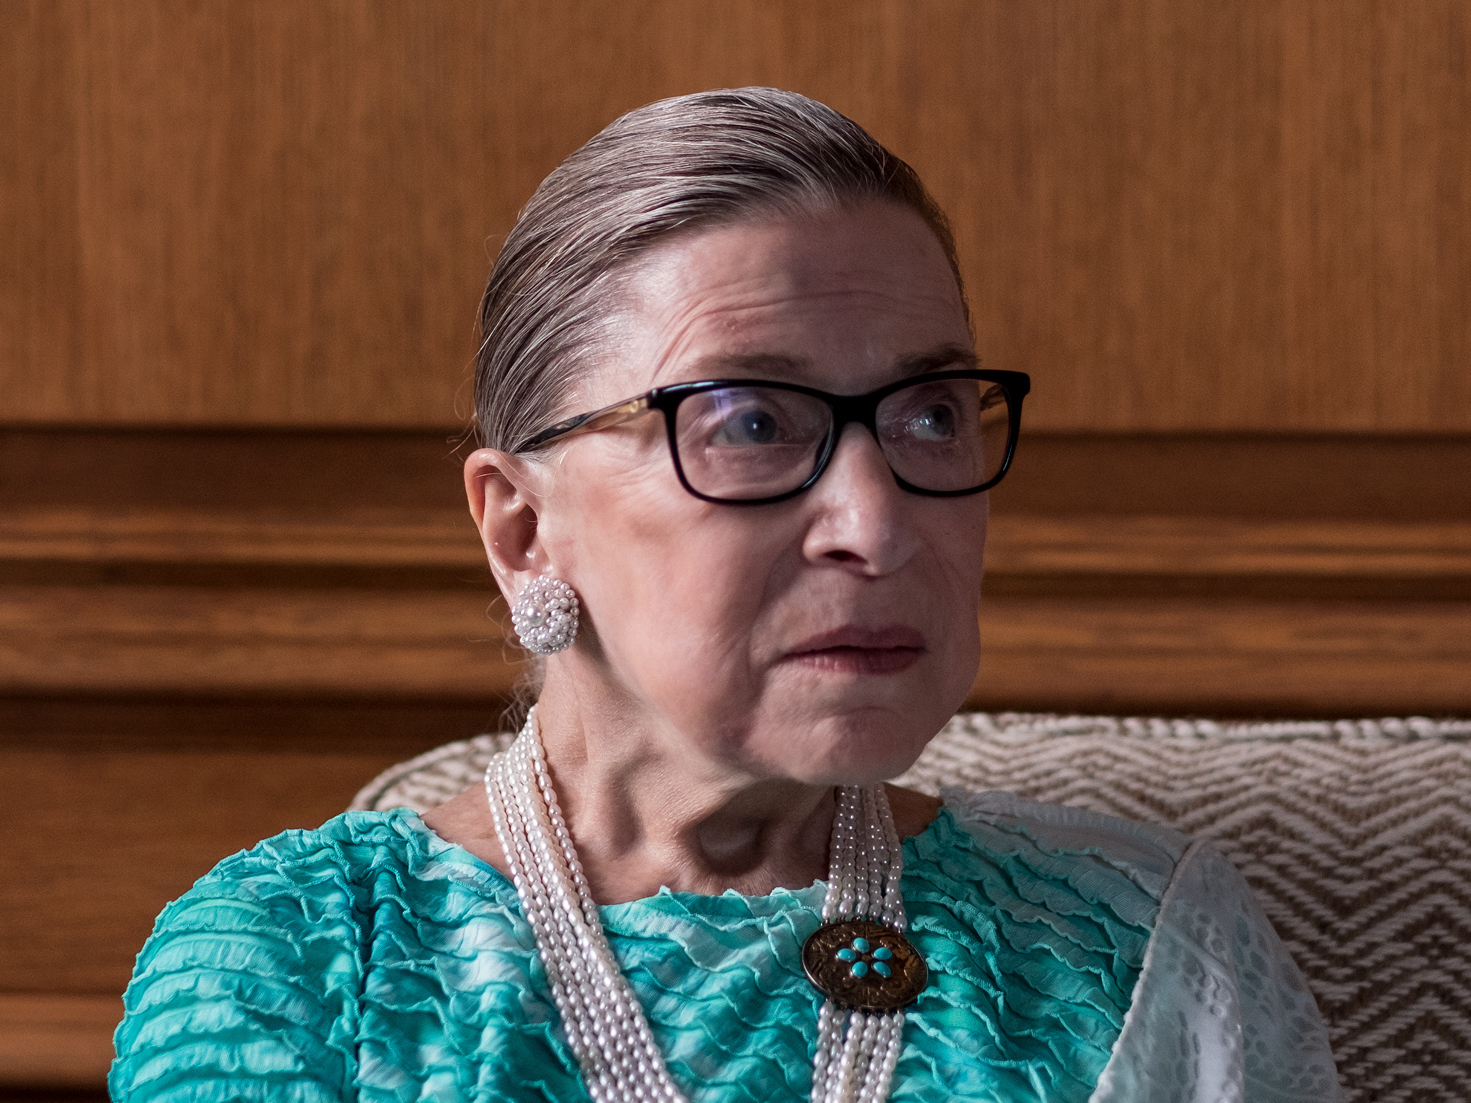 Ruth Bader Ginsburg: Louis Brandeis inspired my work for women's